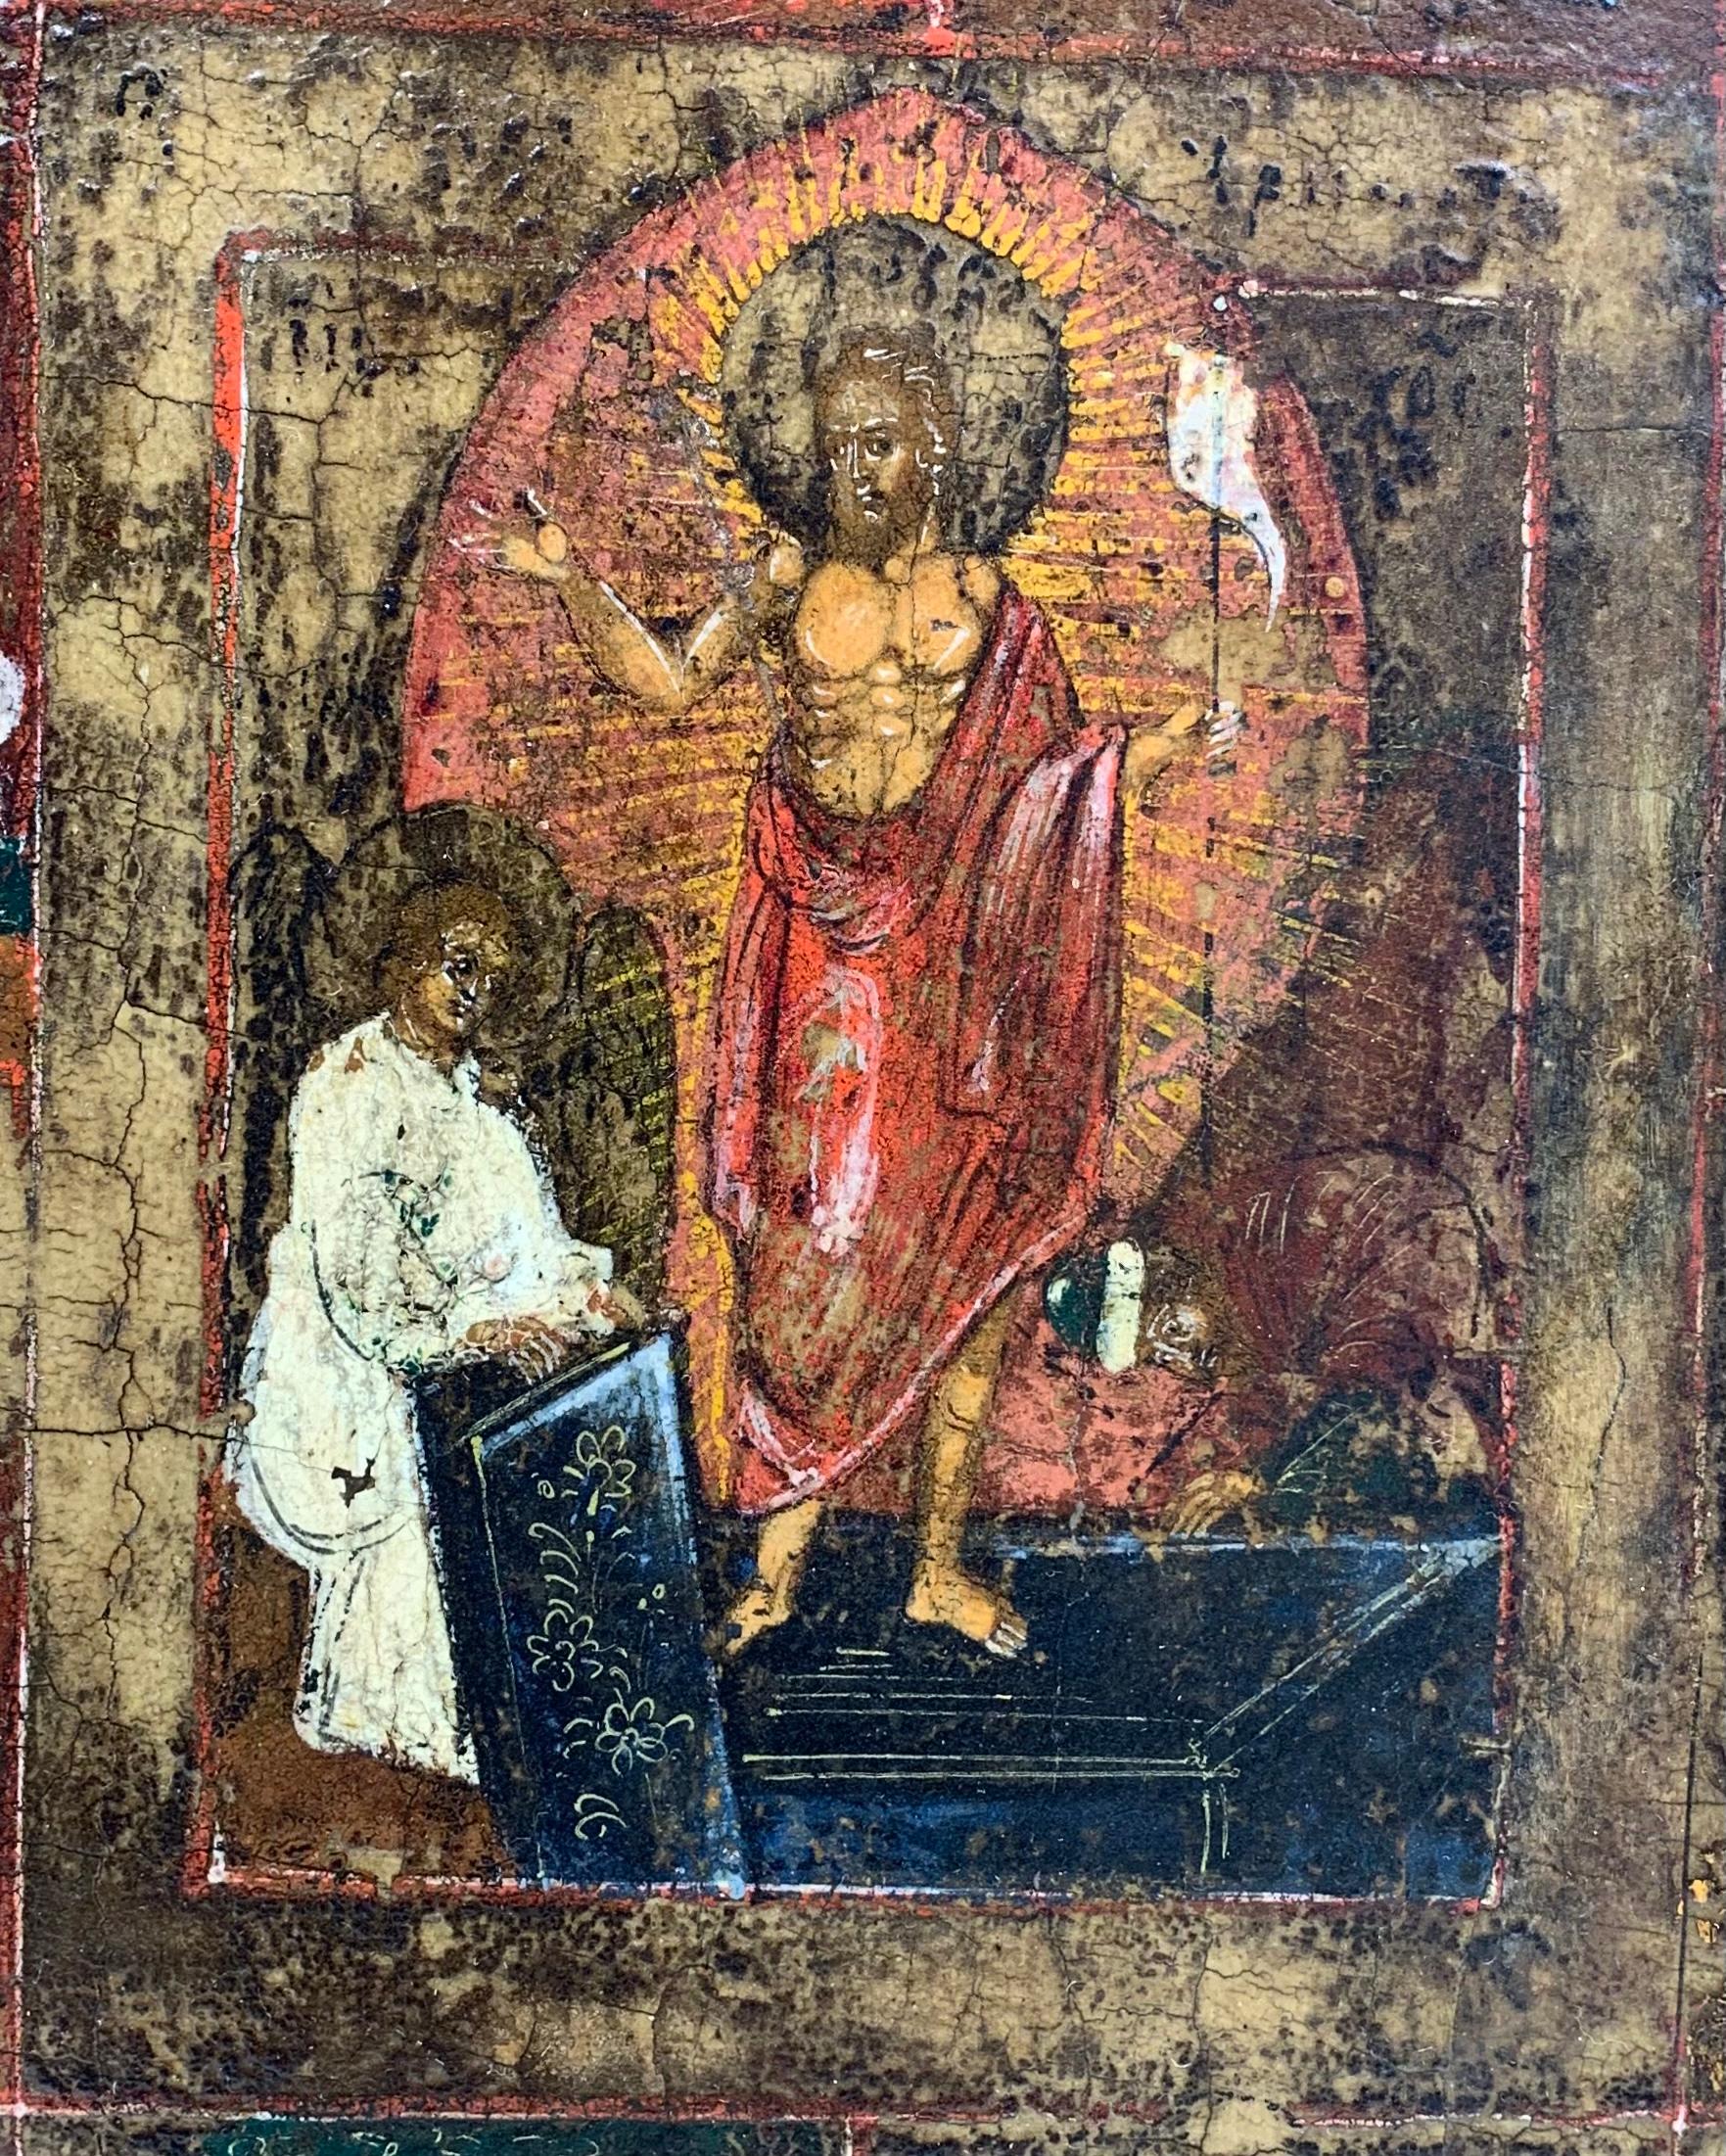 Large antique late 18th century- early 19th century Russian icon of the Resurrection with Great Feasts. Original condition with beautiful age-old patina. The central area depicting the Resurrection of Christ, the great Christian celebration of